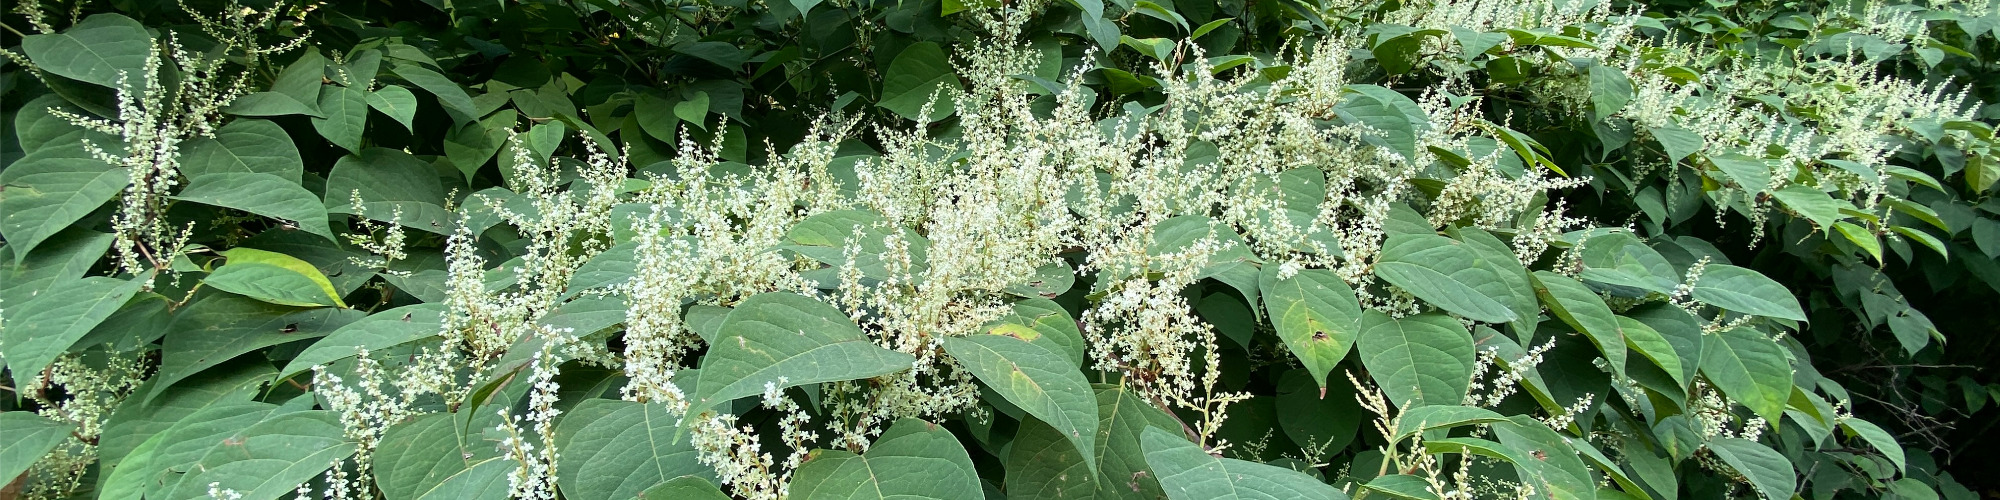 RICS Guidance on Japanese Knotweed - A Roundup for Property Professionals